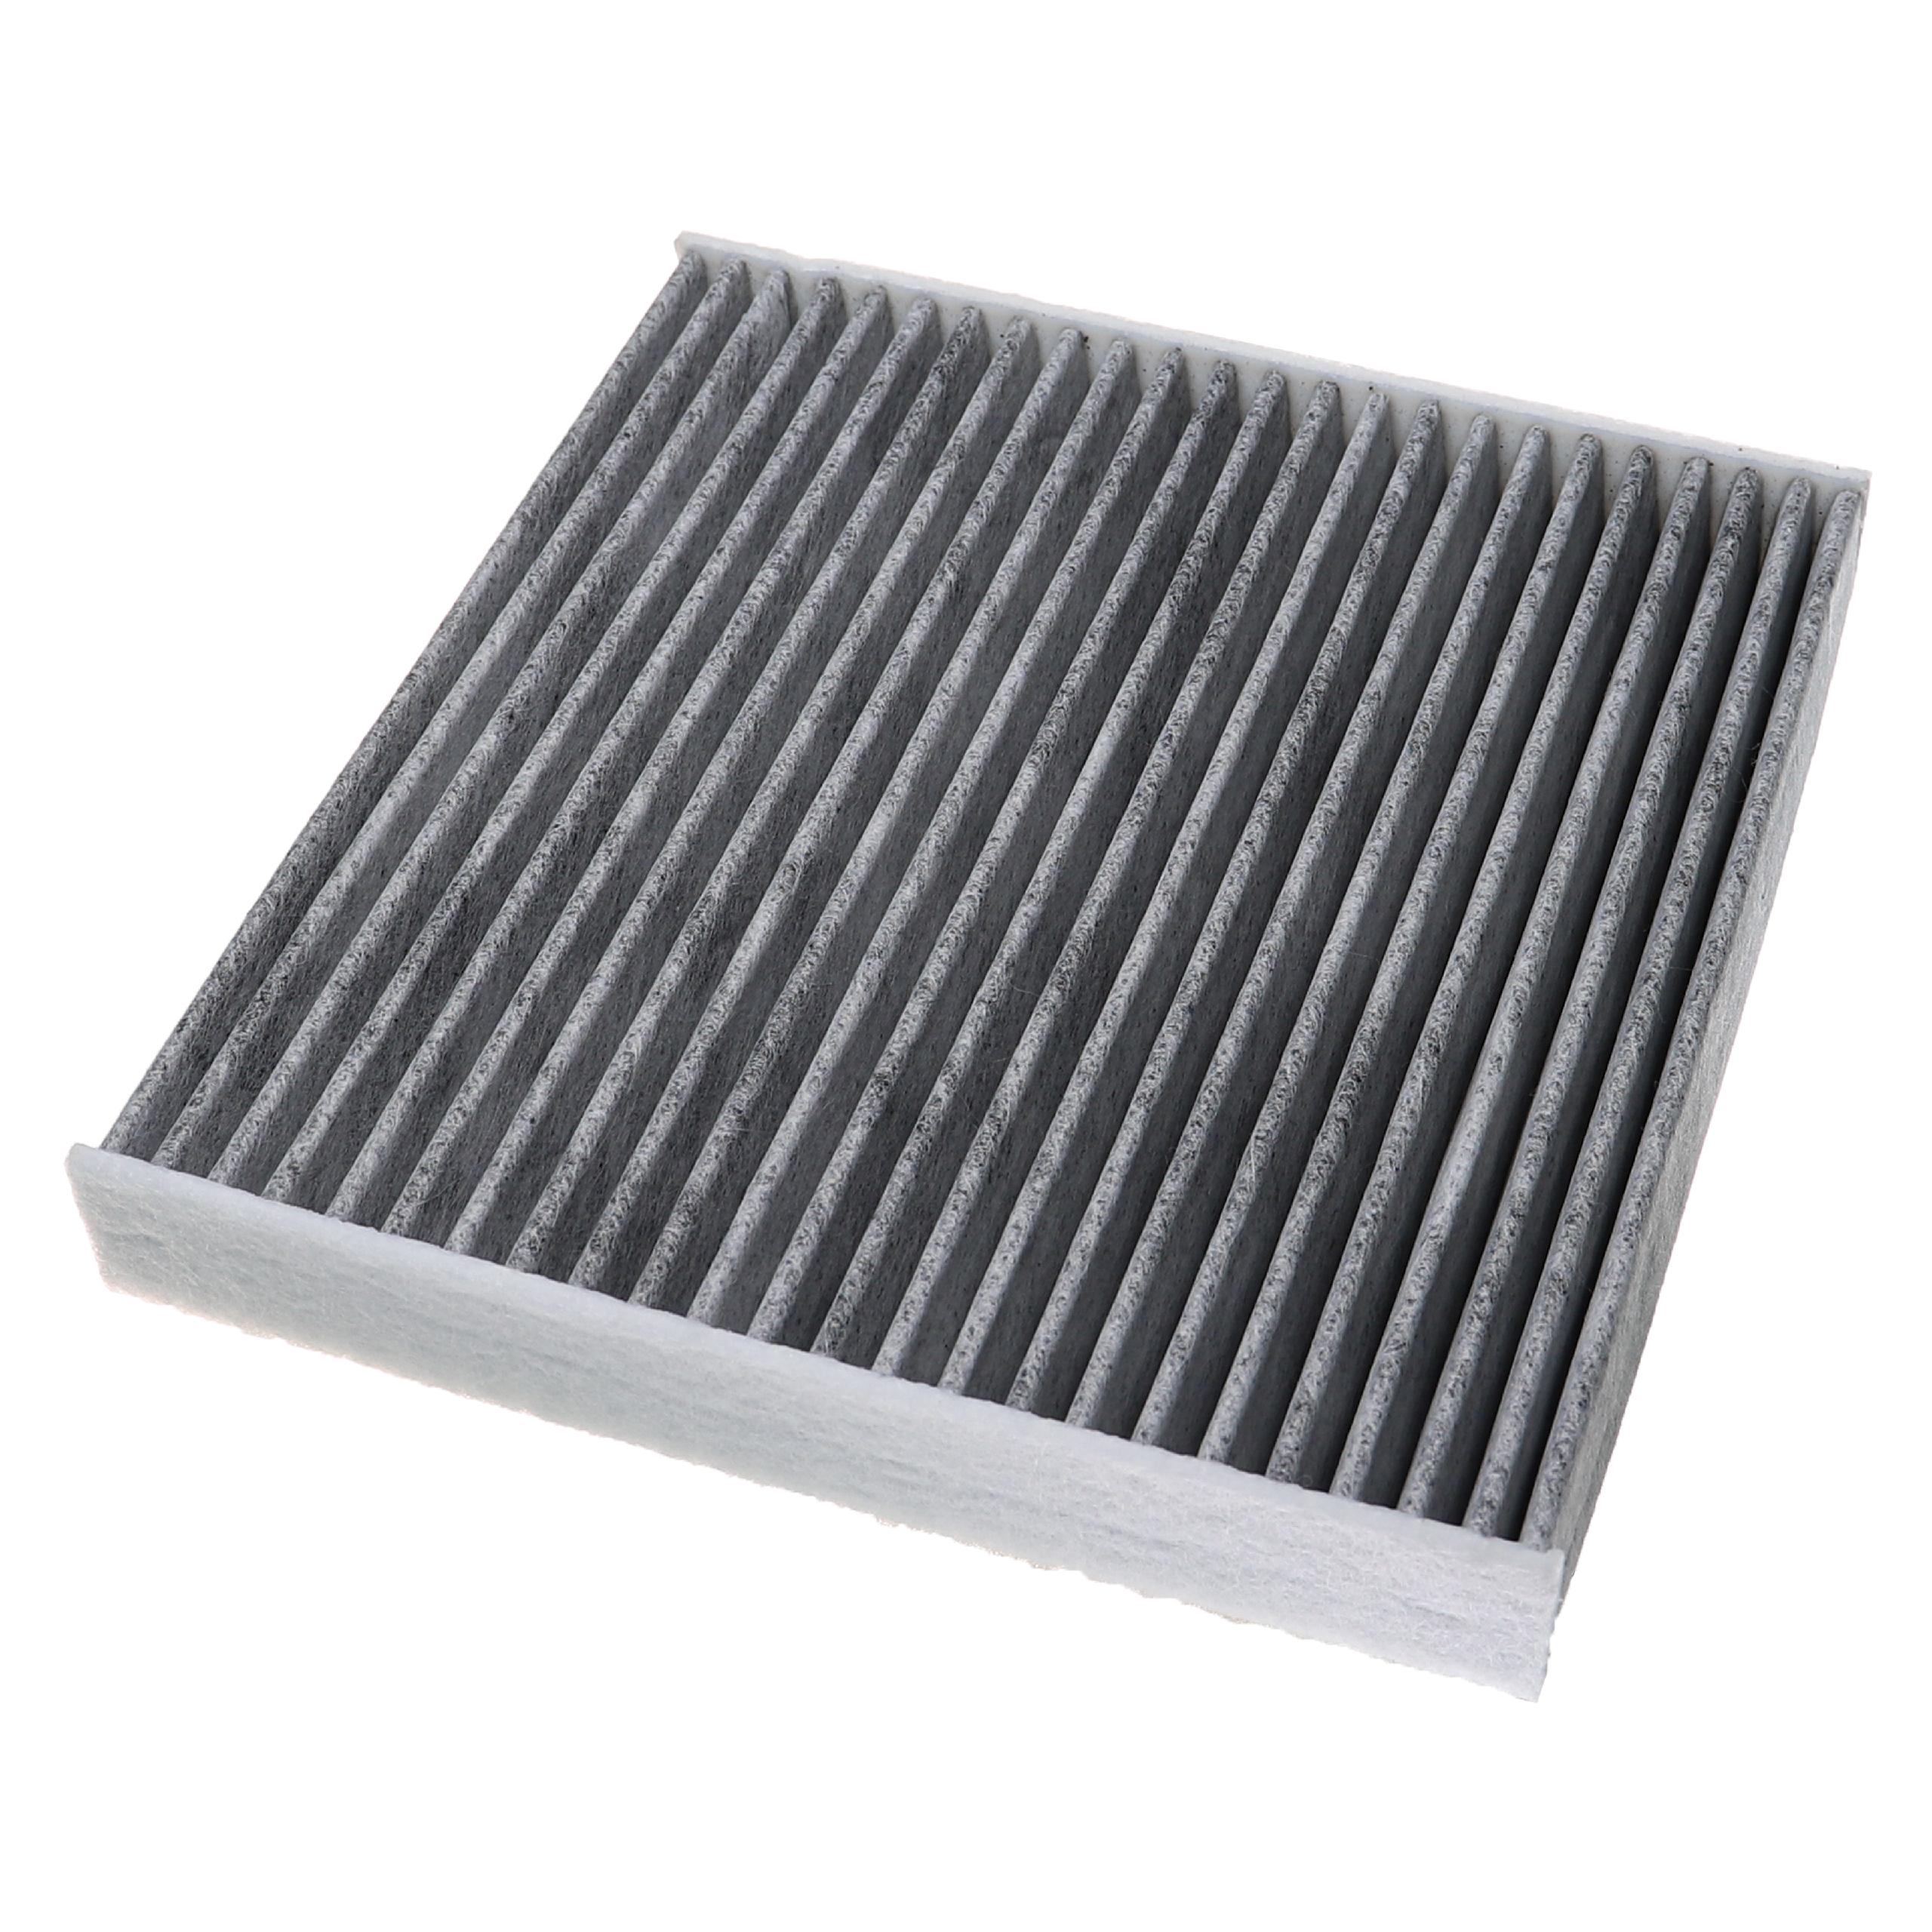 Cabin Air Filter replaces 3F Quality 1675 etc.